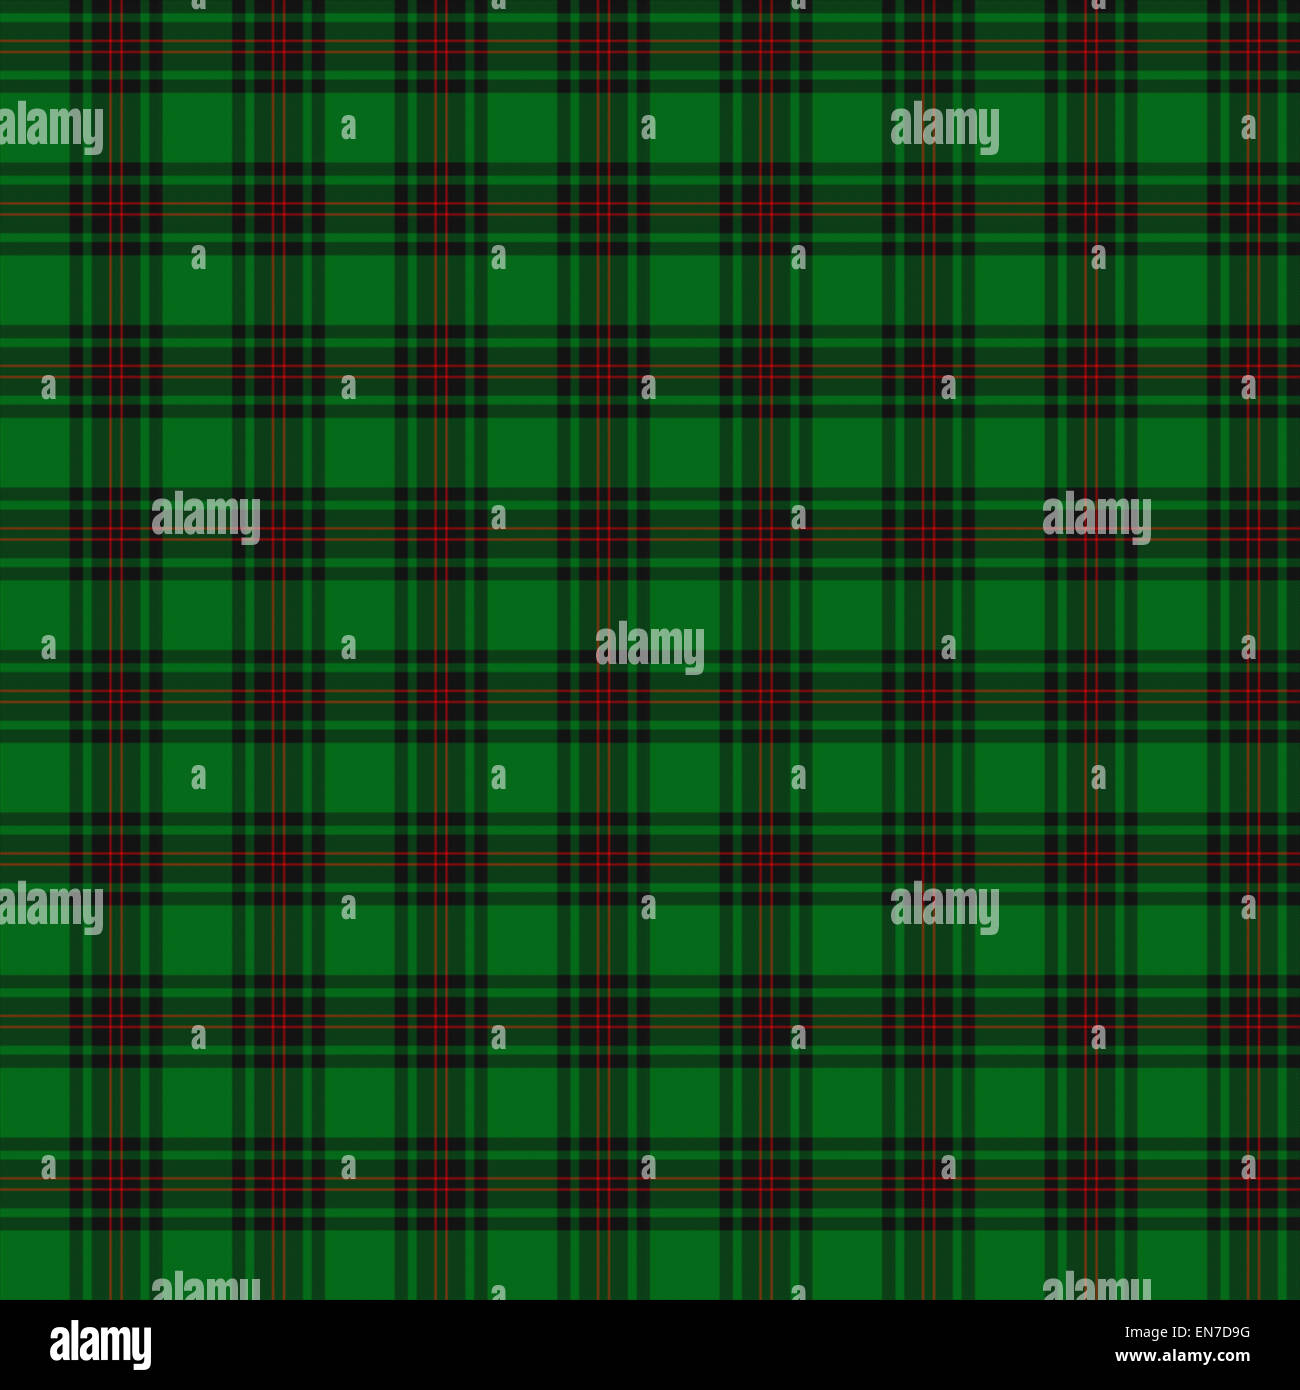 A seamless patterned tile of the clan Lundin tartan. Stock Photo